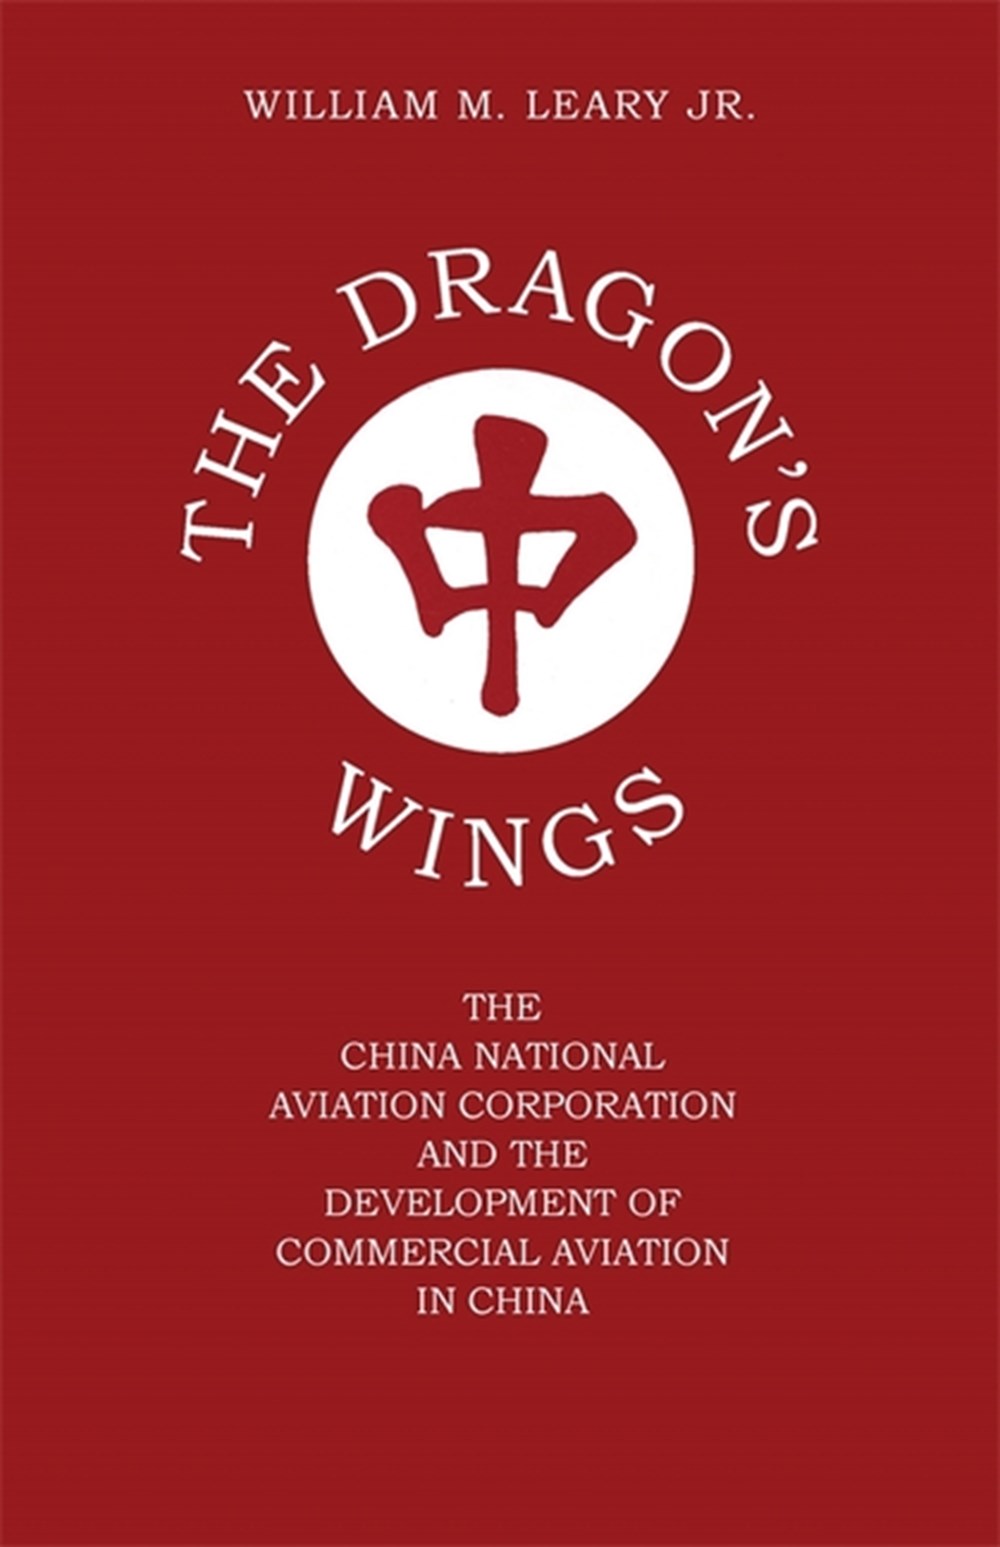 Dragon's Wings The China National Aviation Corporation and the Development of Commercial Aviation in